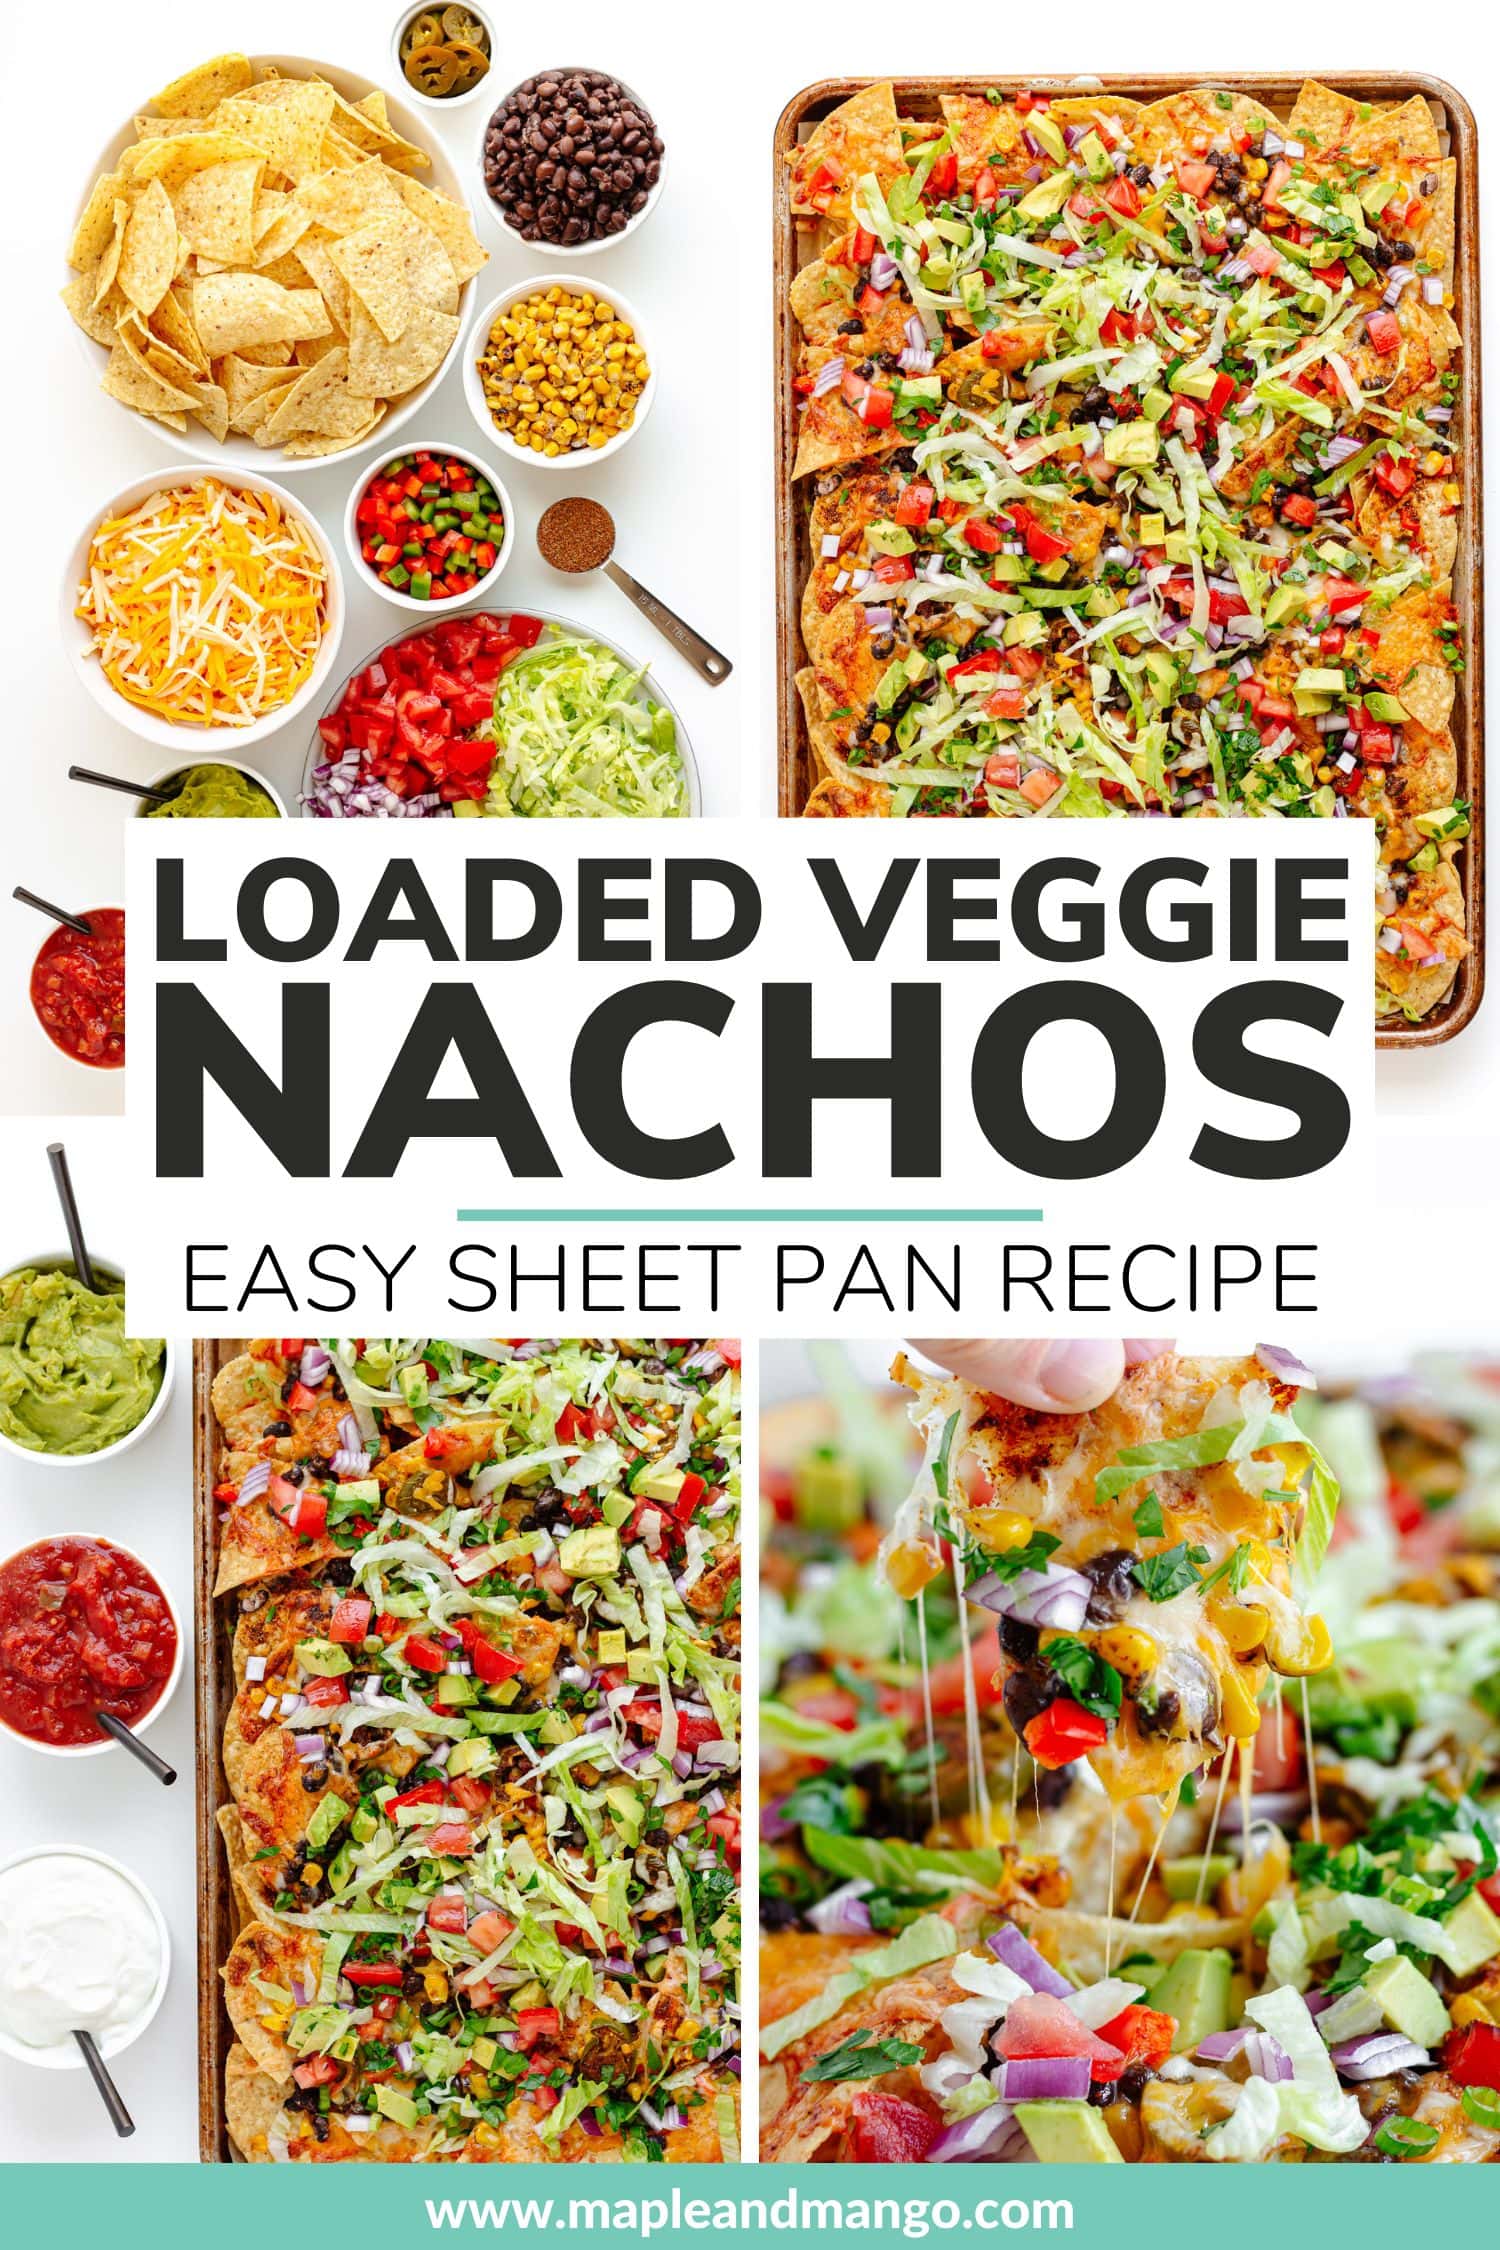 Photo collage of nachos with text overlay "Loaded Veggie Nachos - Easy Sheet Pan Recipe".